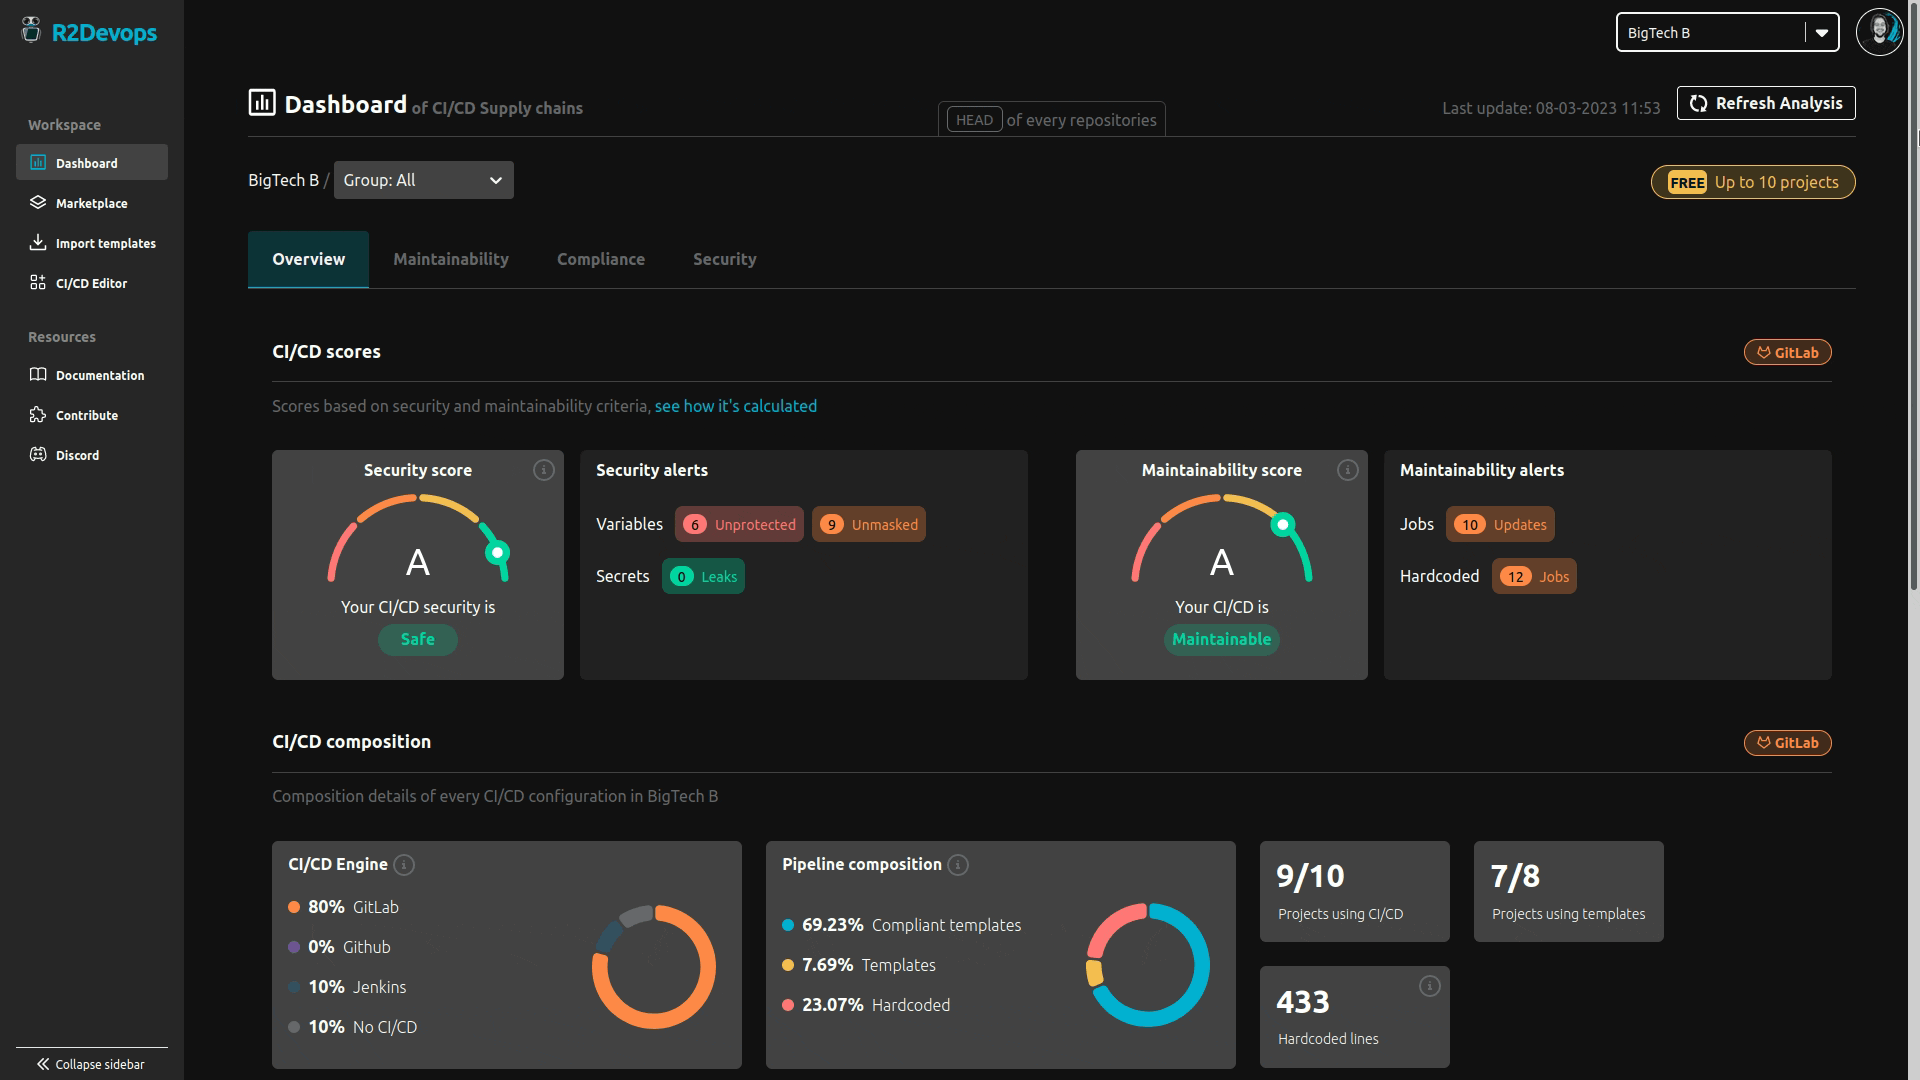 Gif of overview section of the Analysis Dashboard